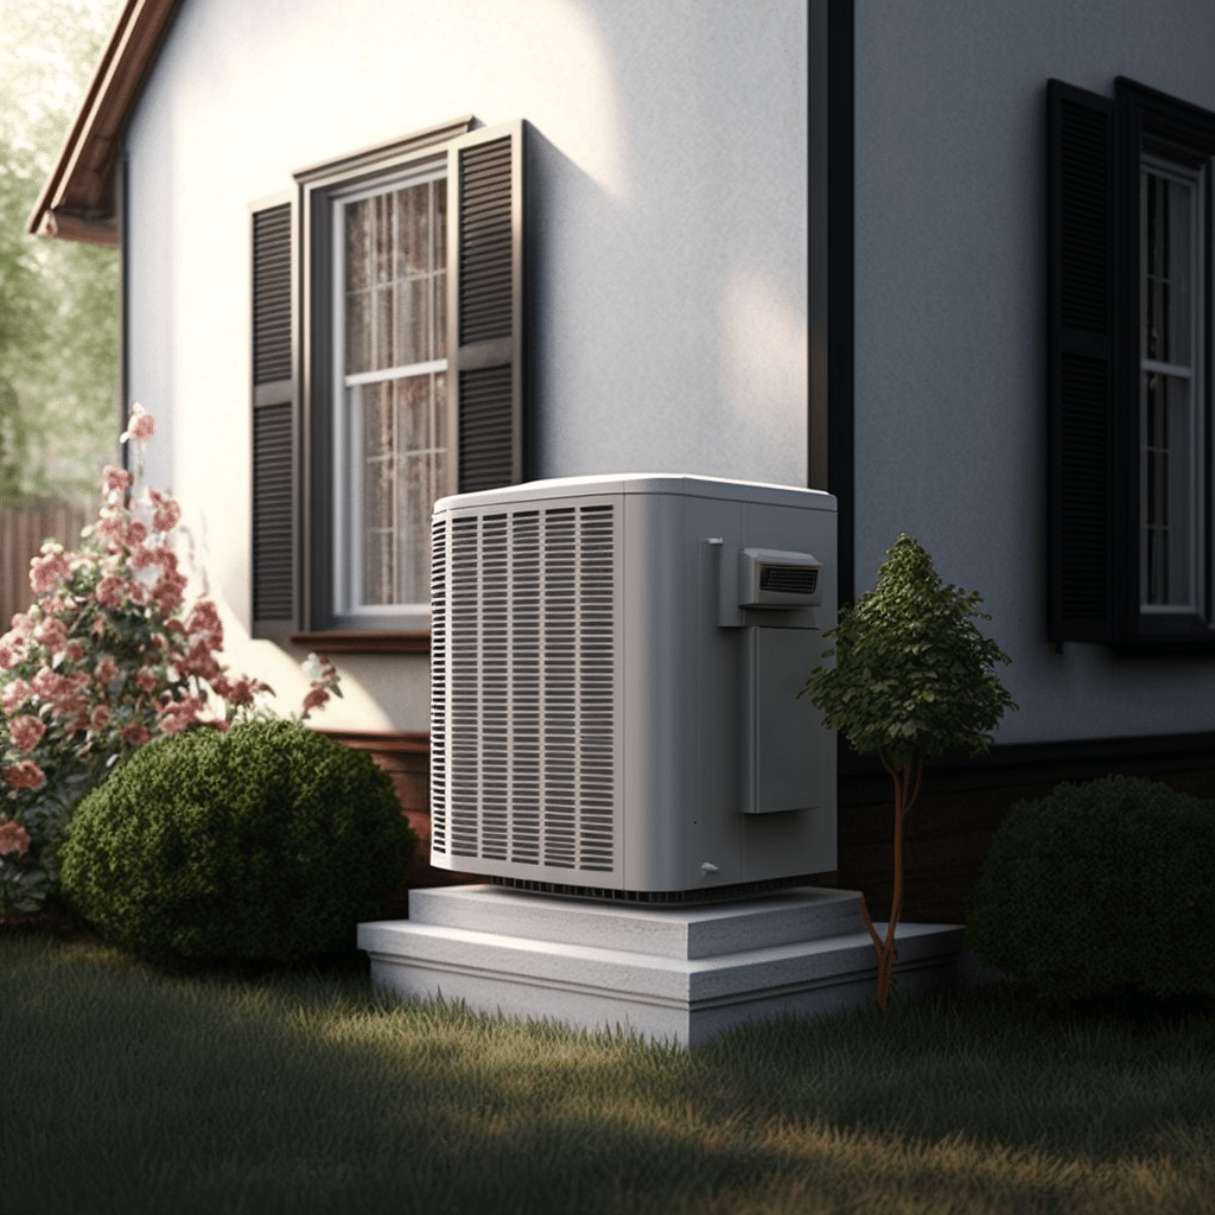 How Much Does It Cost To Install HVAC In A House